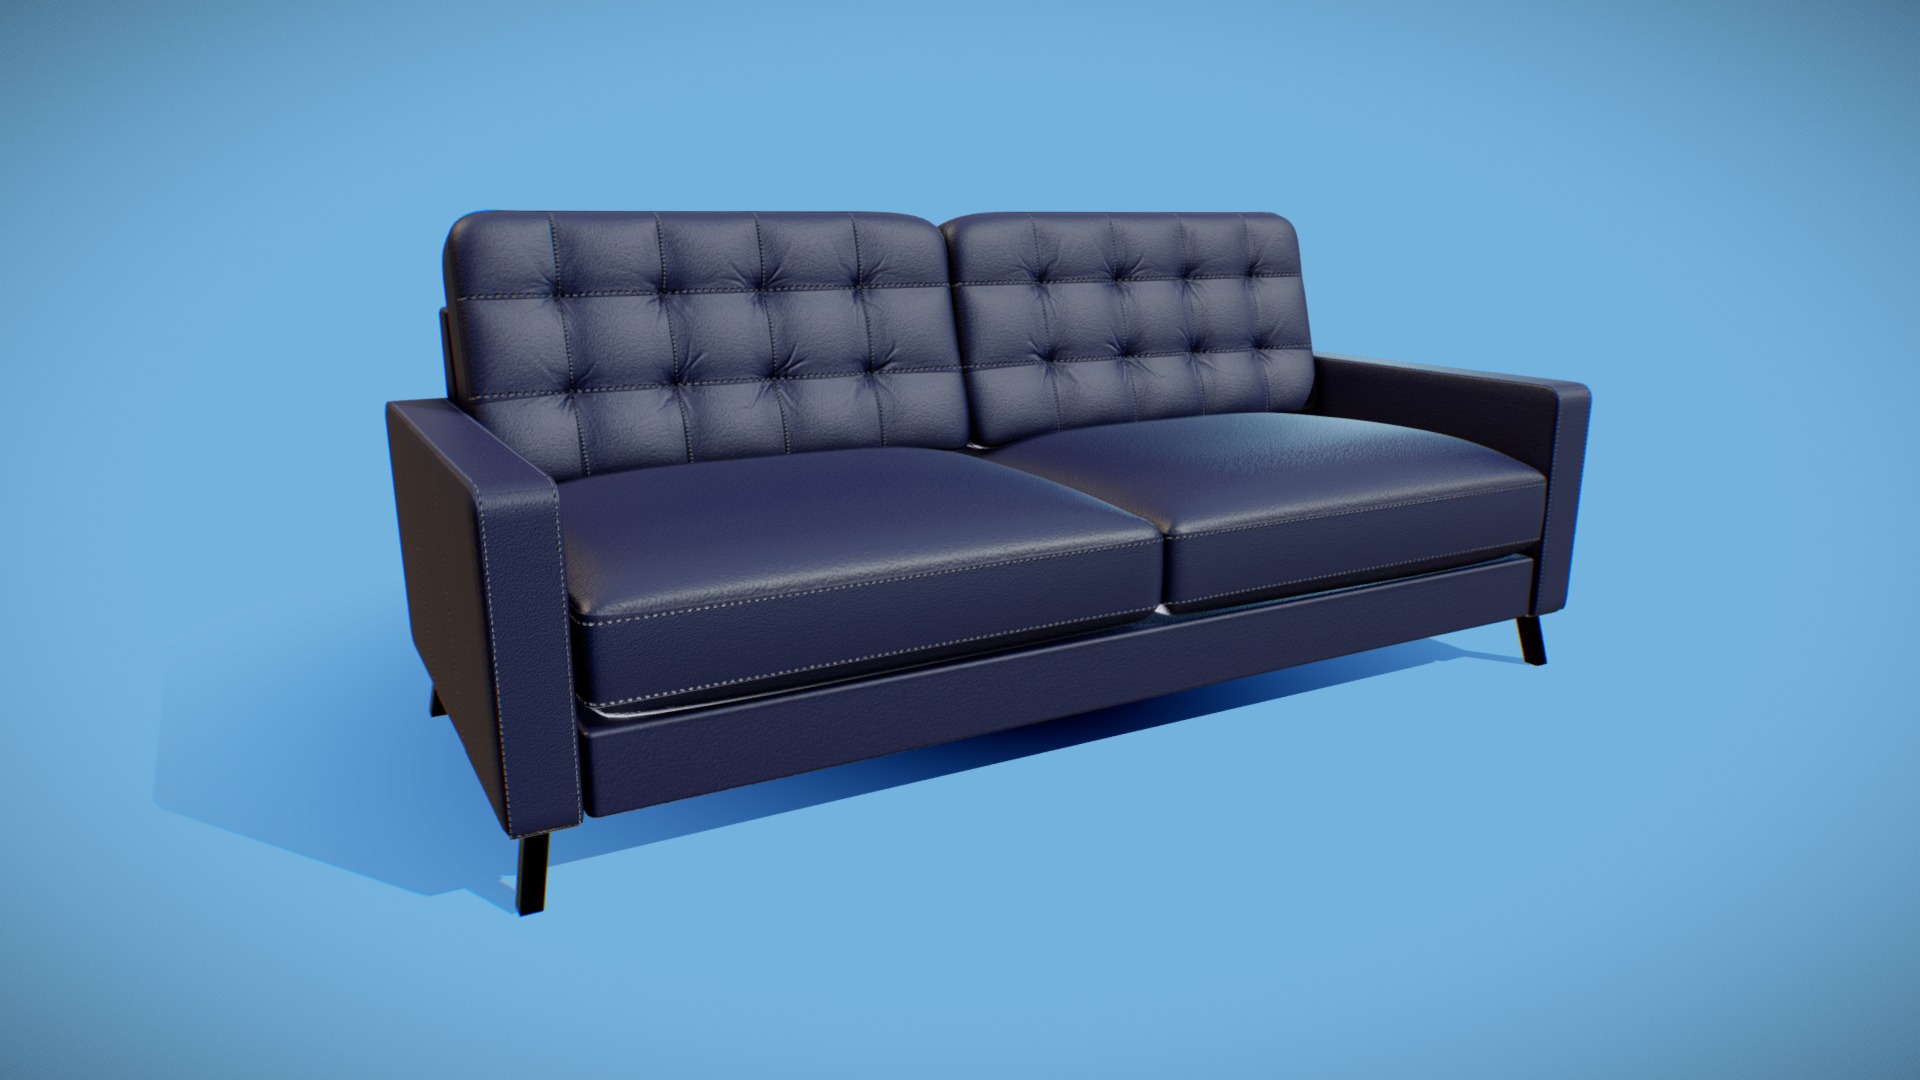 3D model Sofa for your comfort - This is a 3D model of the Sofa for your comfort. The 3D model is about a blue recliner with a grey seat.